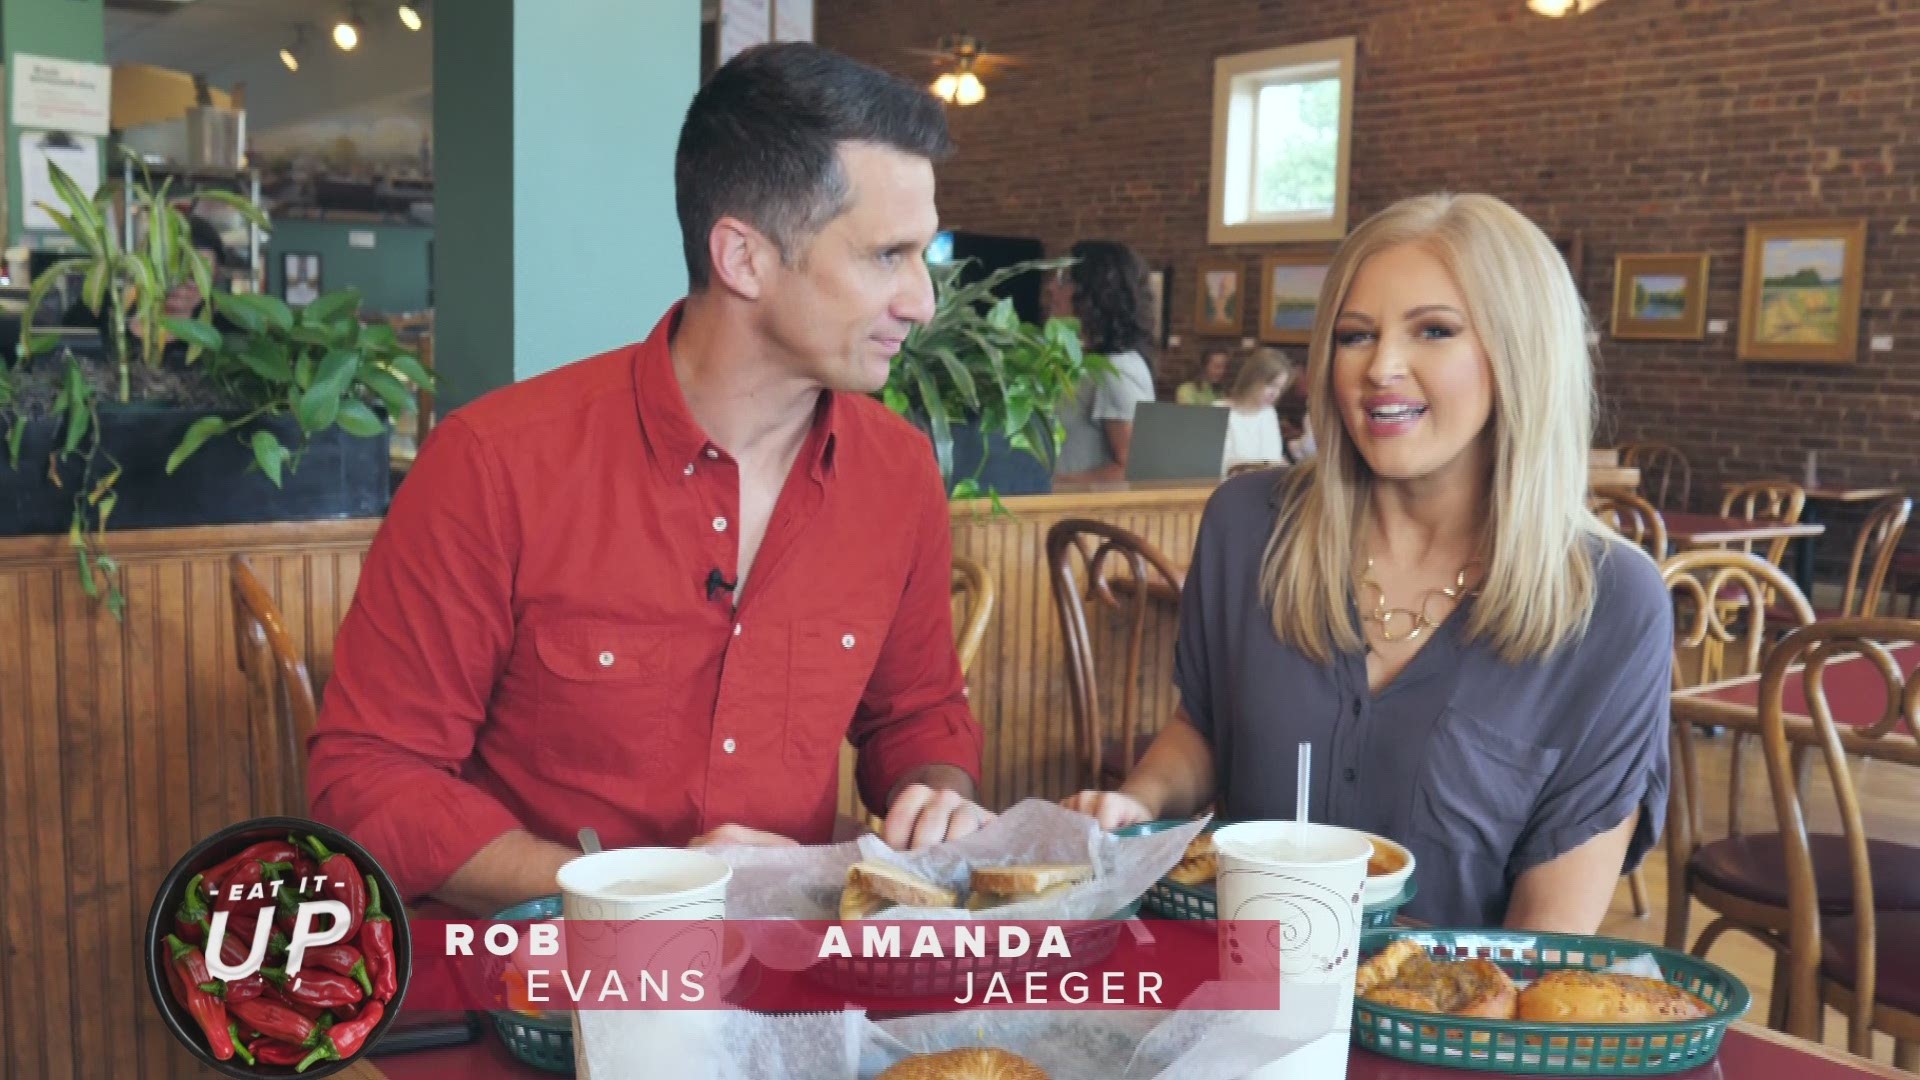 Yum alert! Amanda Jaeger and Rob Evans hit up a classic in this week's edition of Eat It Up!